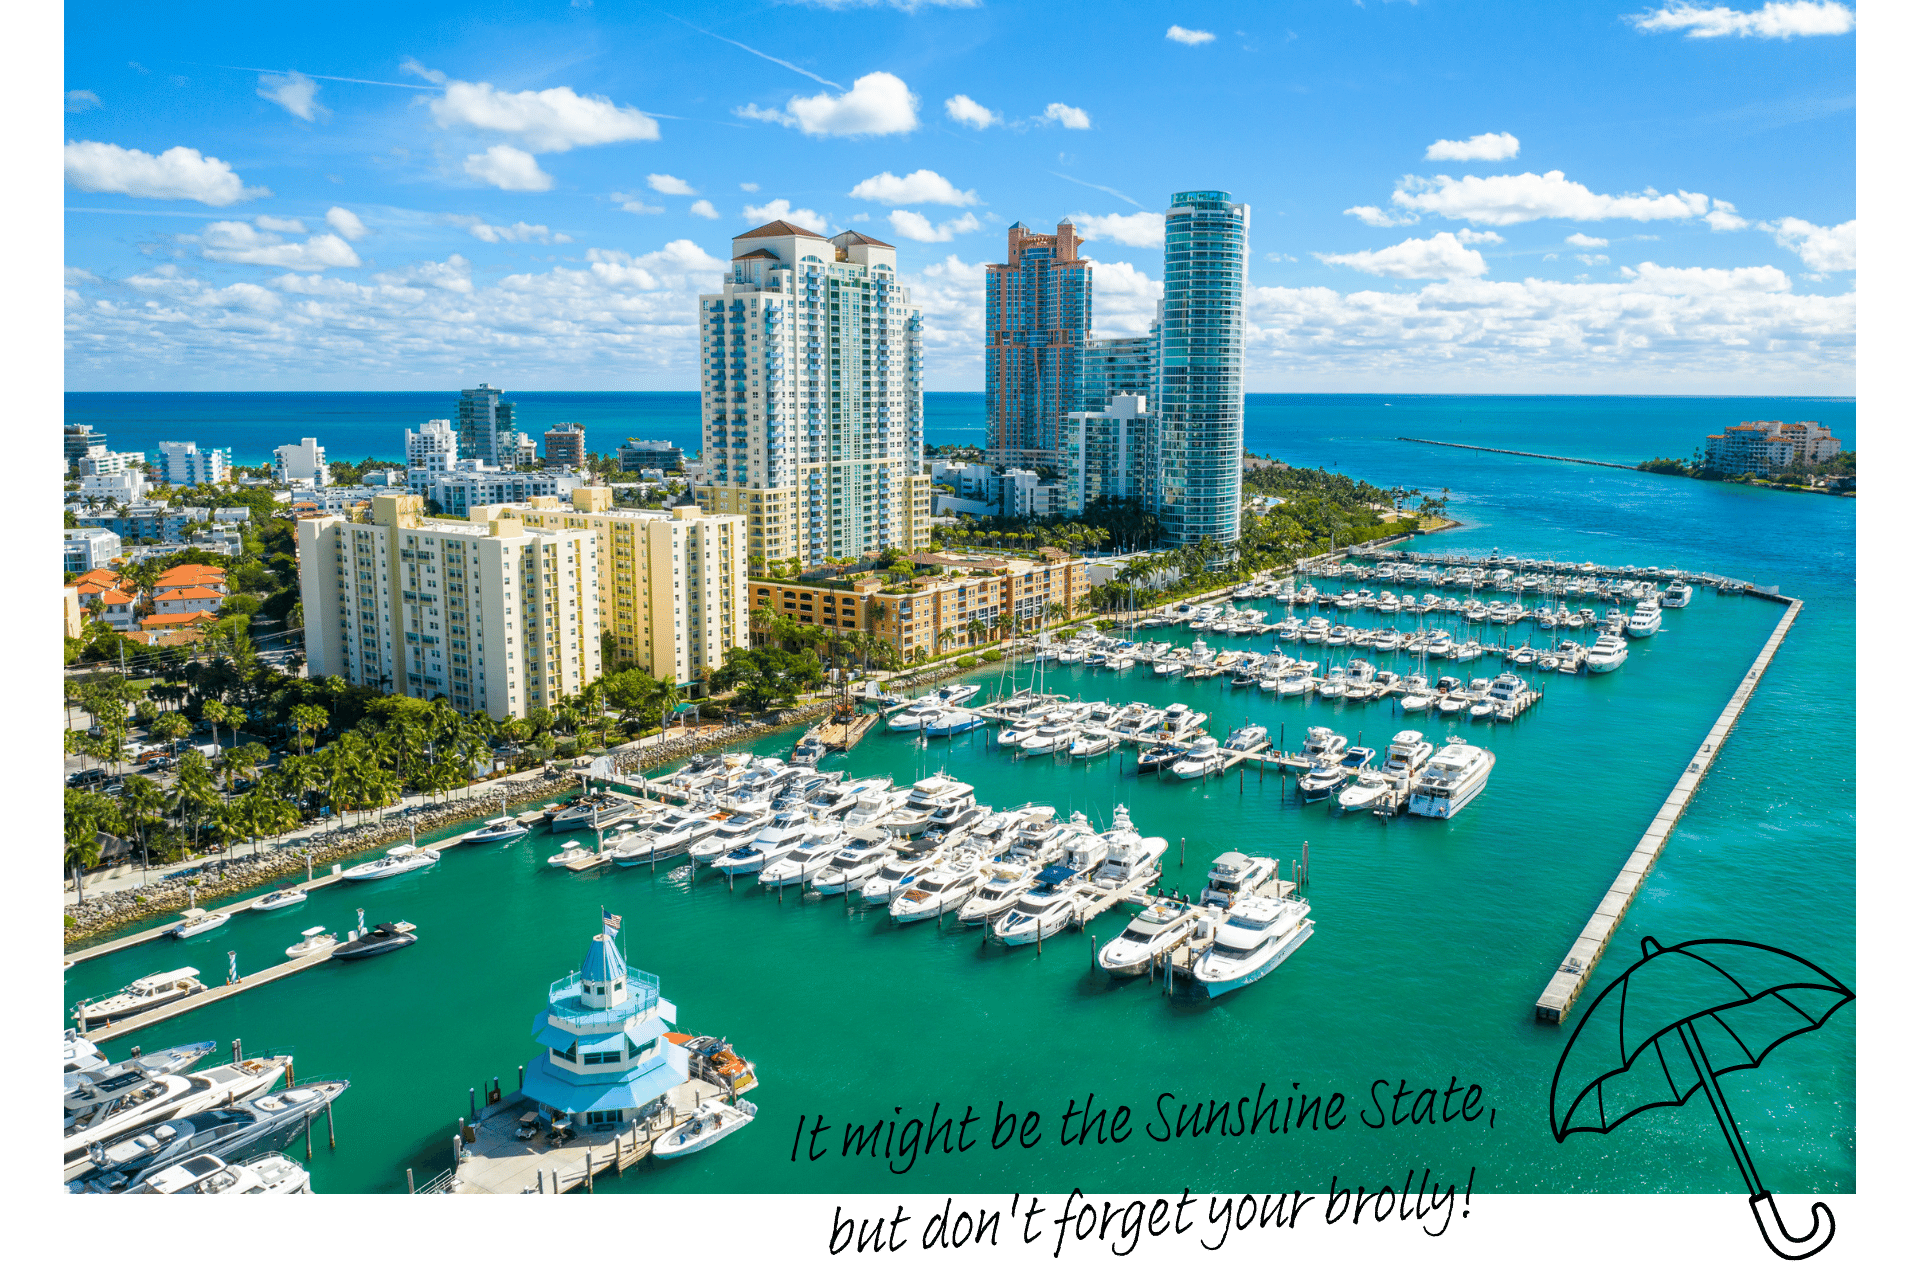 What's the weather like in Florida? An image shows the marina in Miami from the sky.